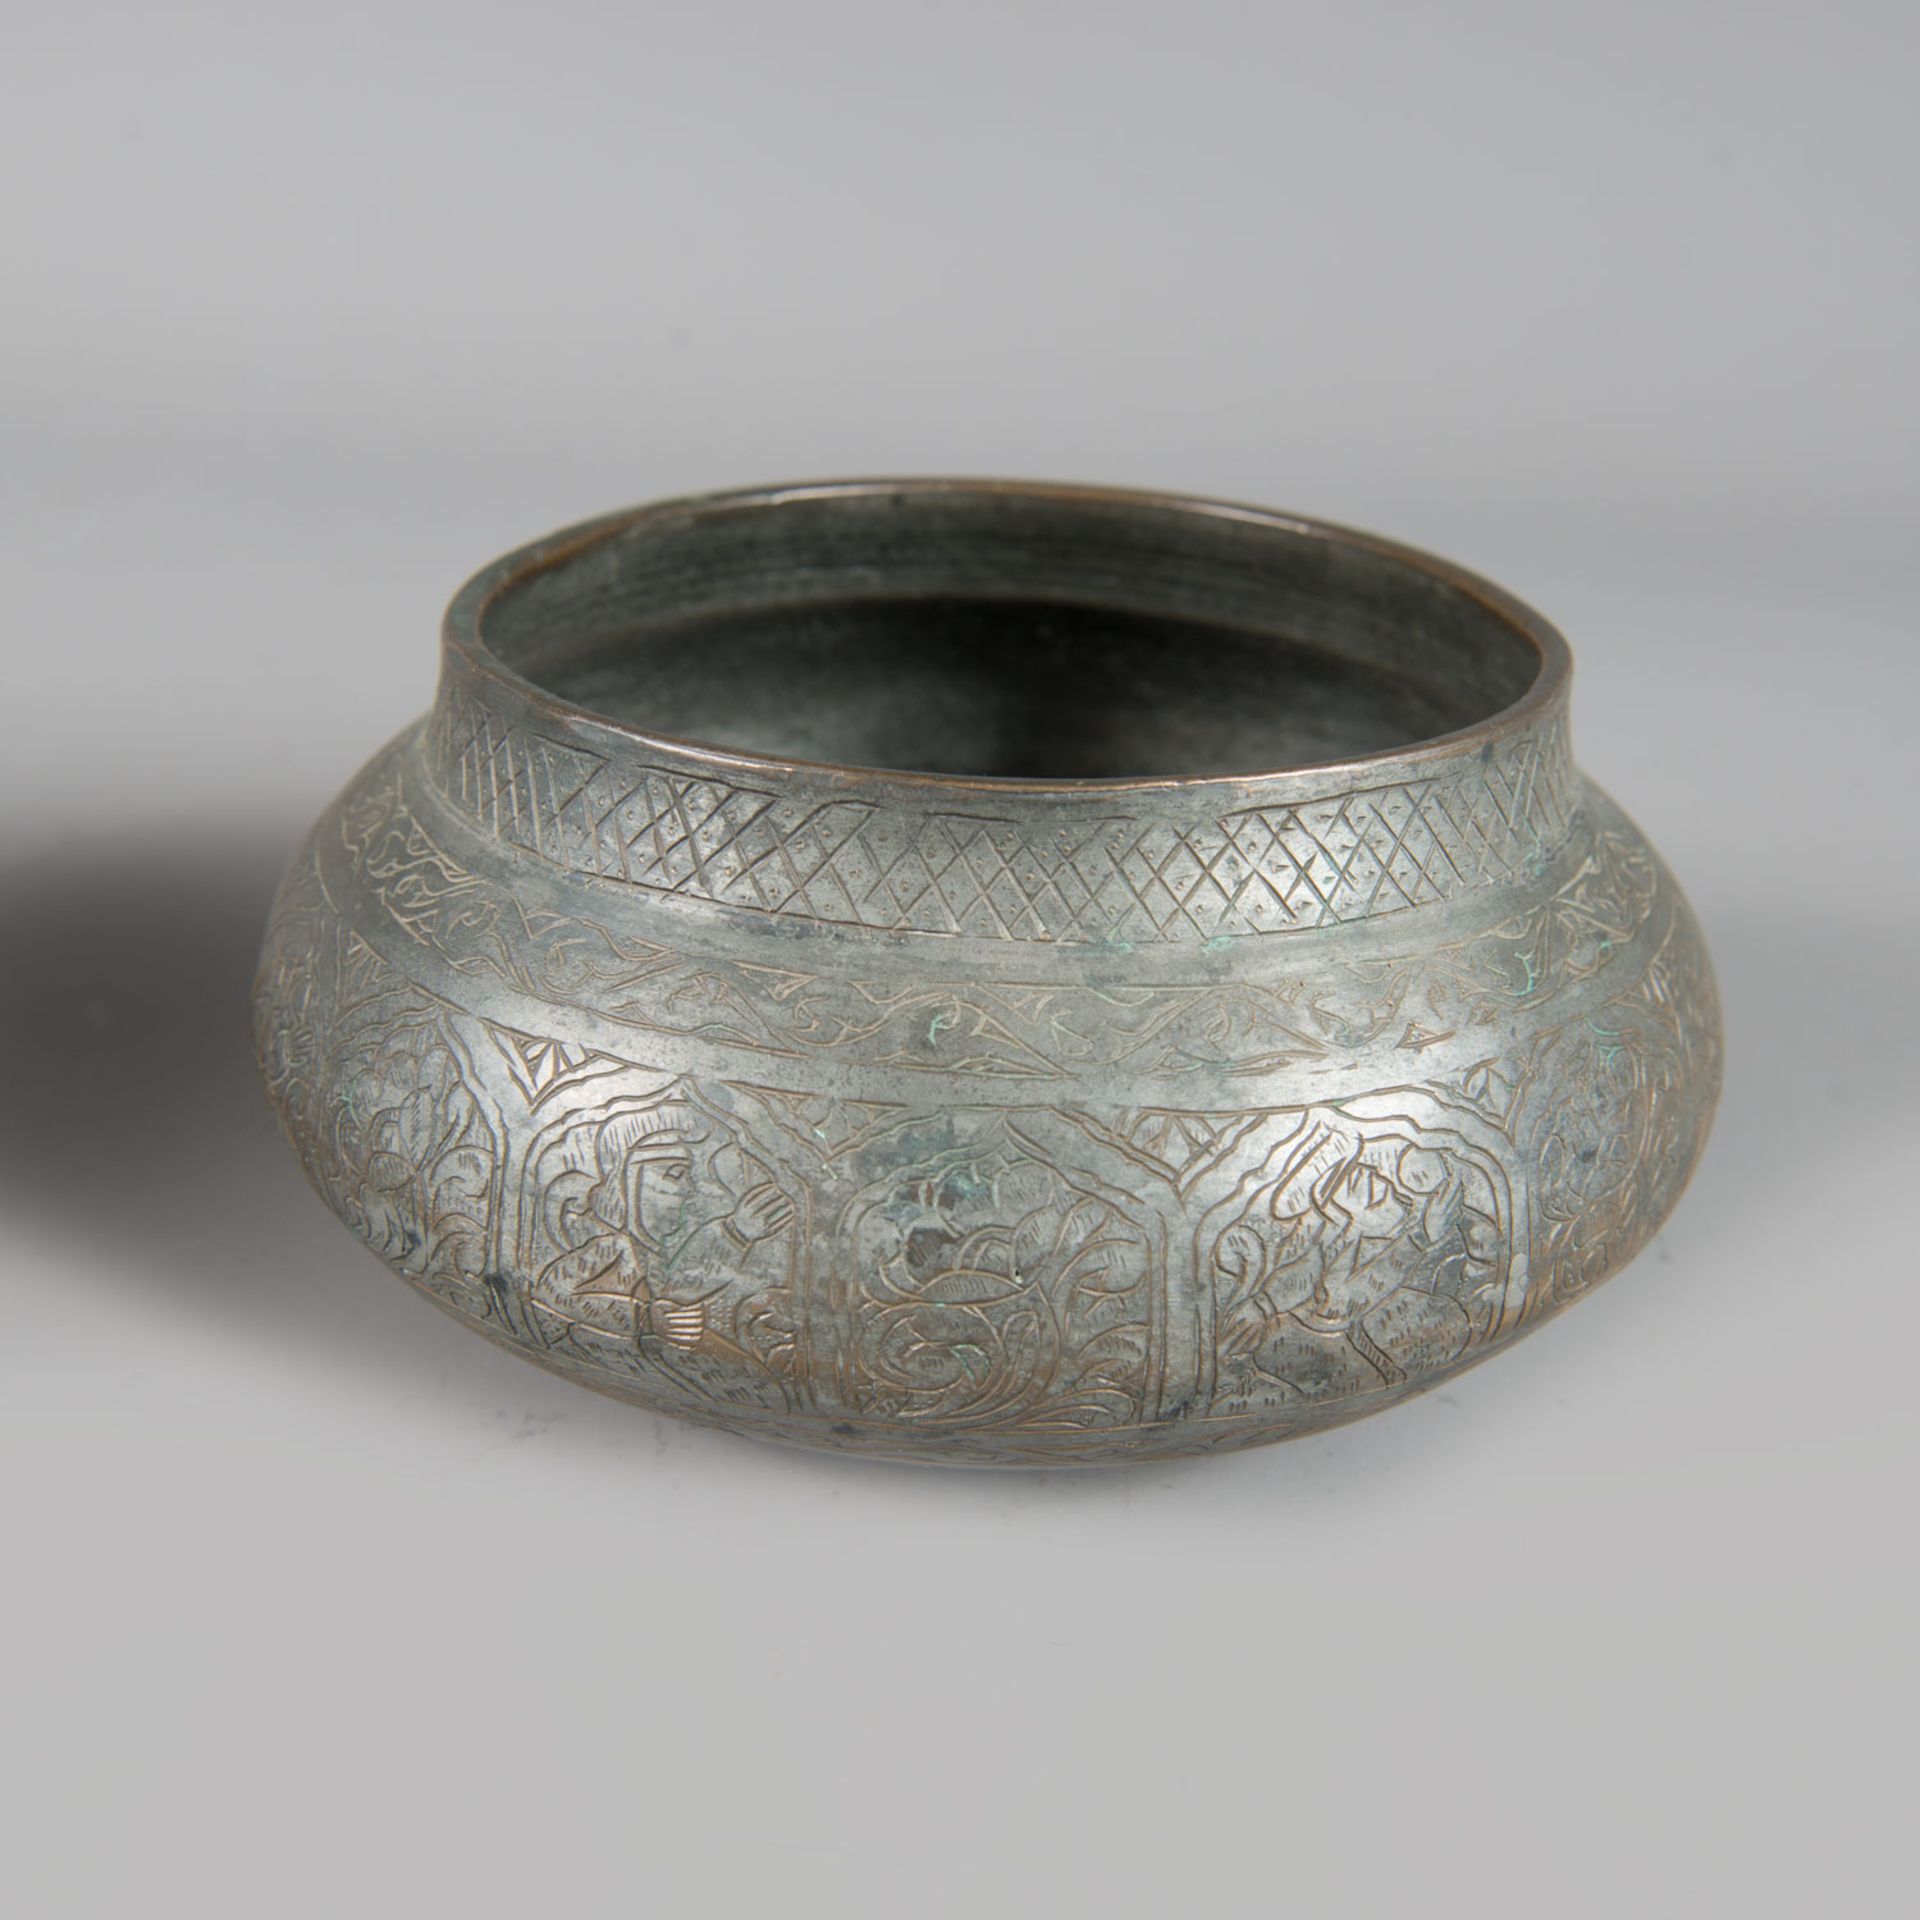 3 Oriental Bowls - Image 3 of 3